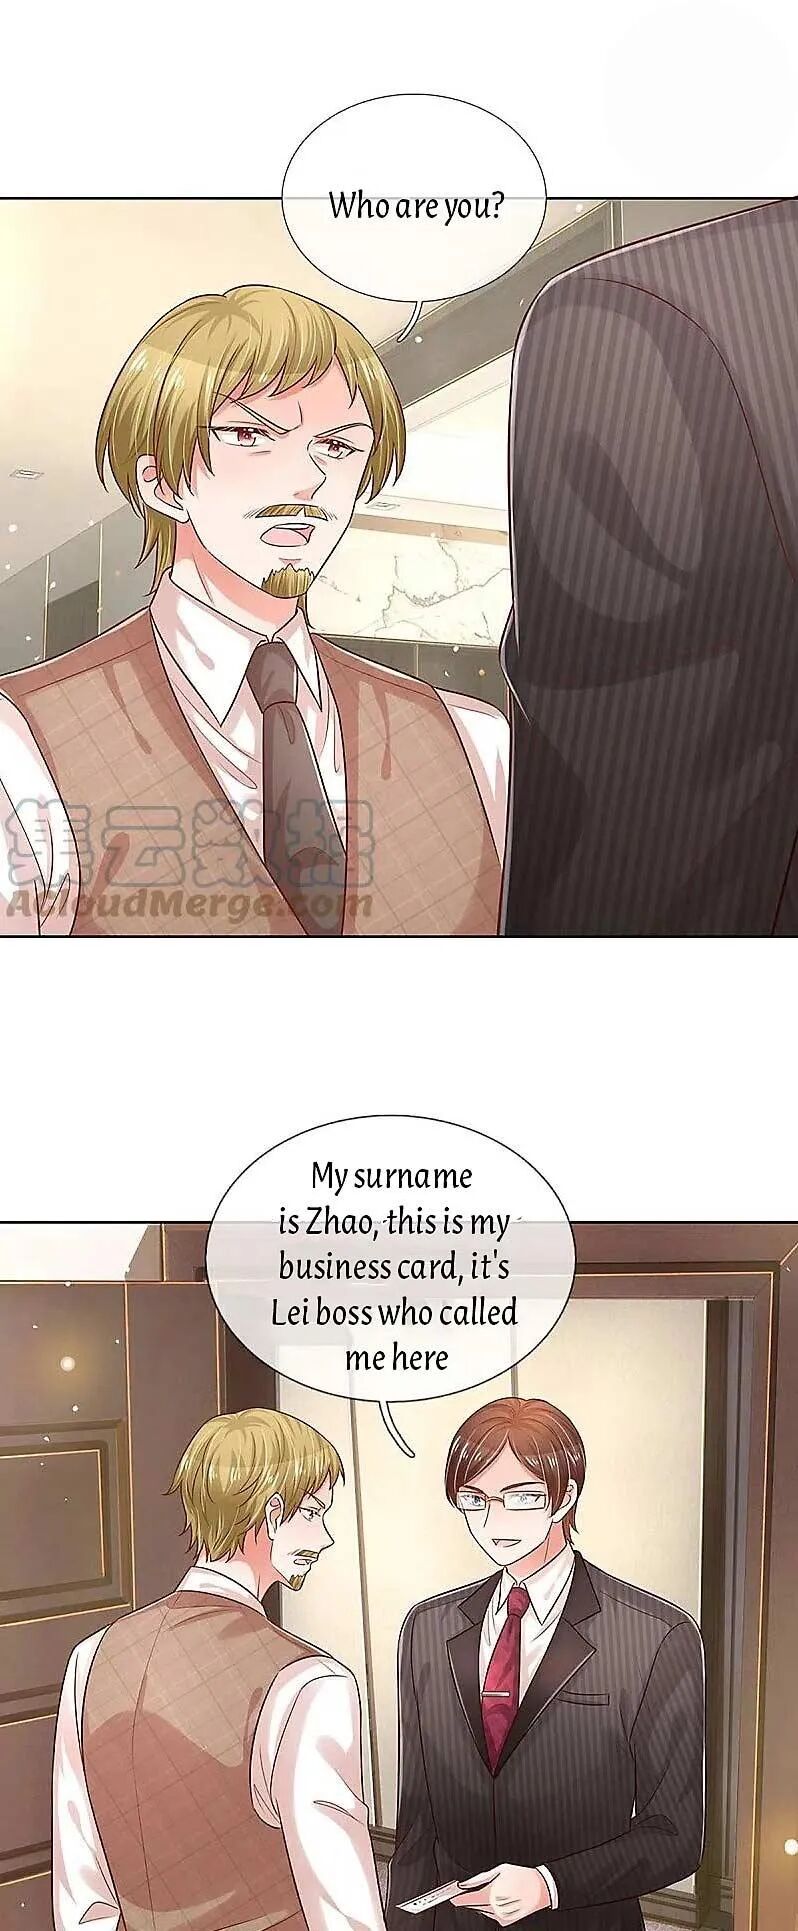 Mommy Run Away: Daddy Is Chasing After You Chapter 315 - HolyManga.net